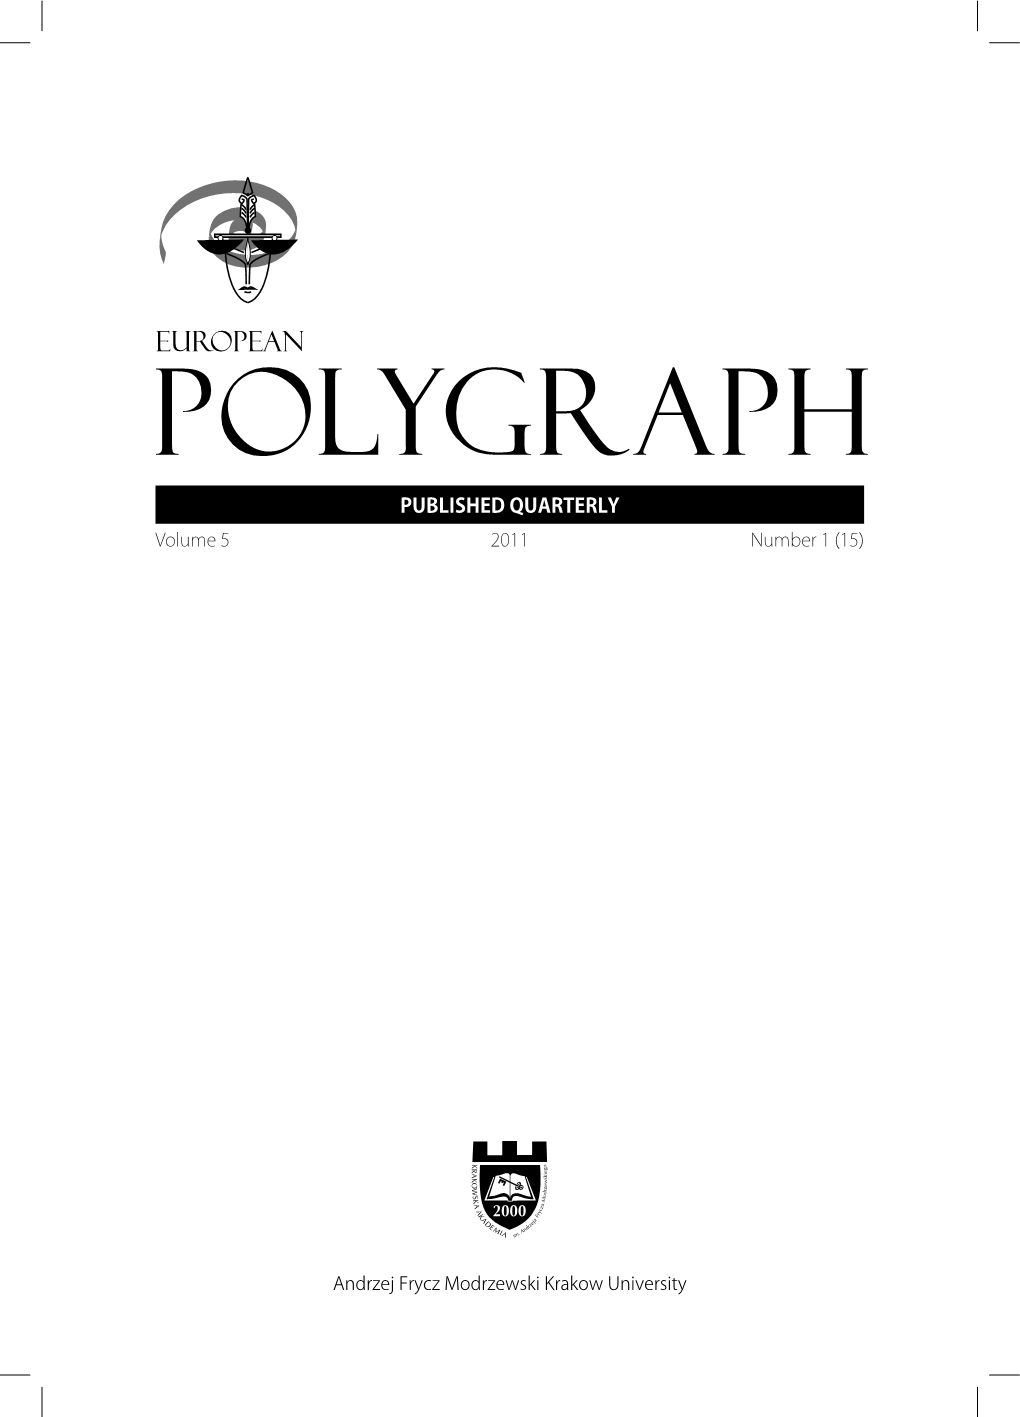 T. Shurany, I. Ravid Evaluation of Polygraph Charts: Formats, Criteria and Scoring [T.I. Publications 2004, 150 pp.] Cover Image